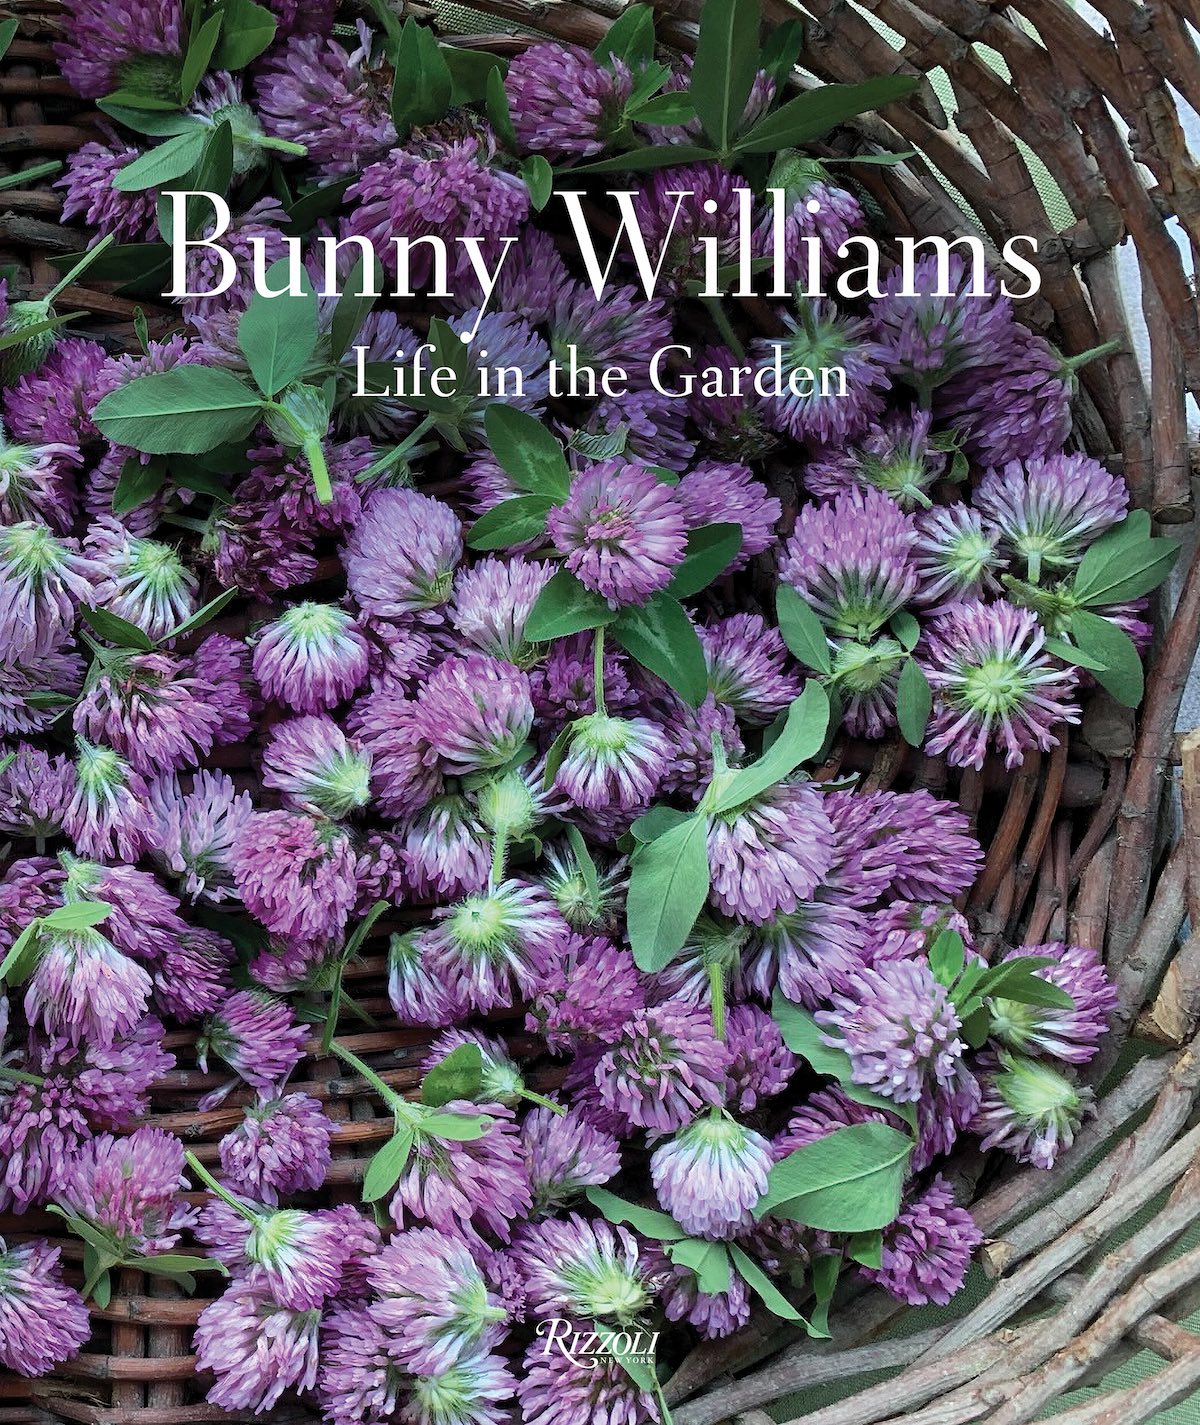 Purple thistle flowers lay in a basket on the cover of Bunny Williams's LIFE IN THE GARDEN.